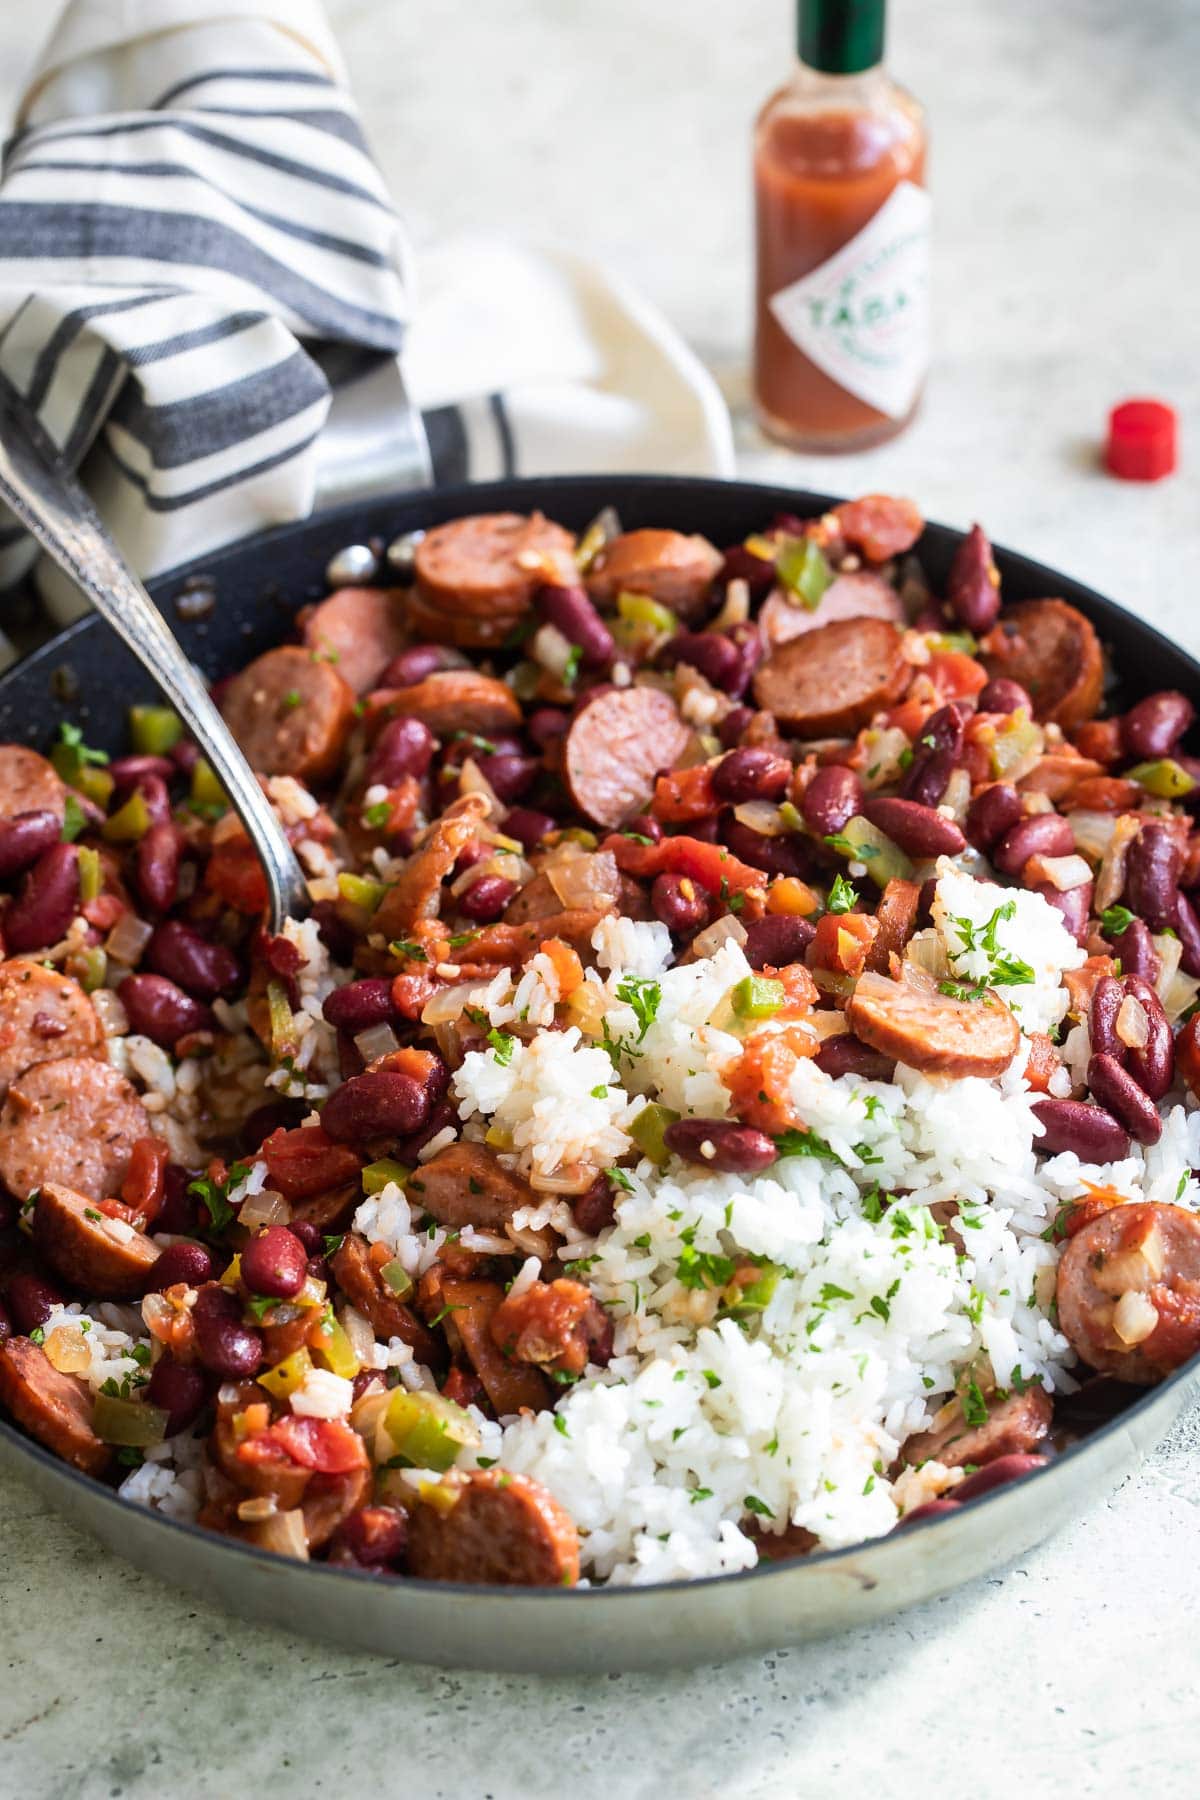 Red beans and rice in a frying pan.